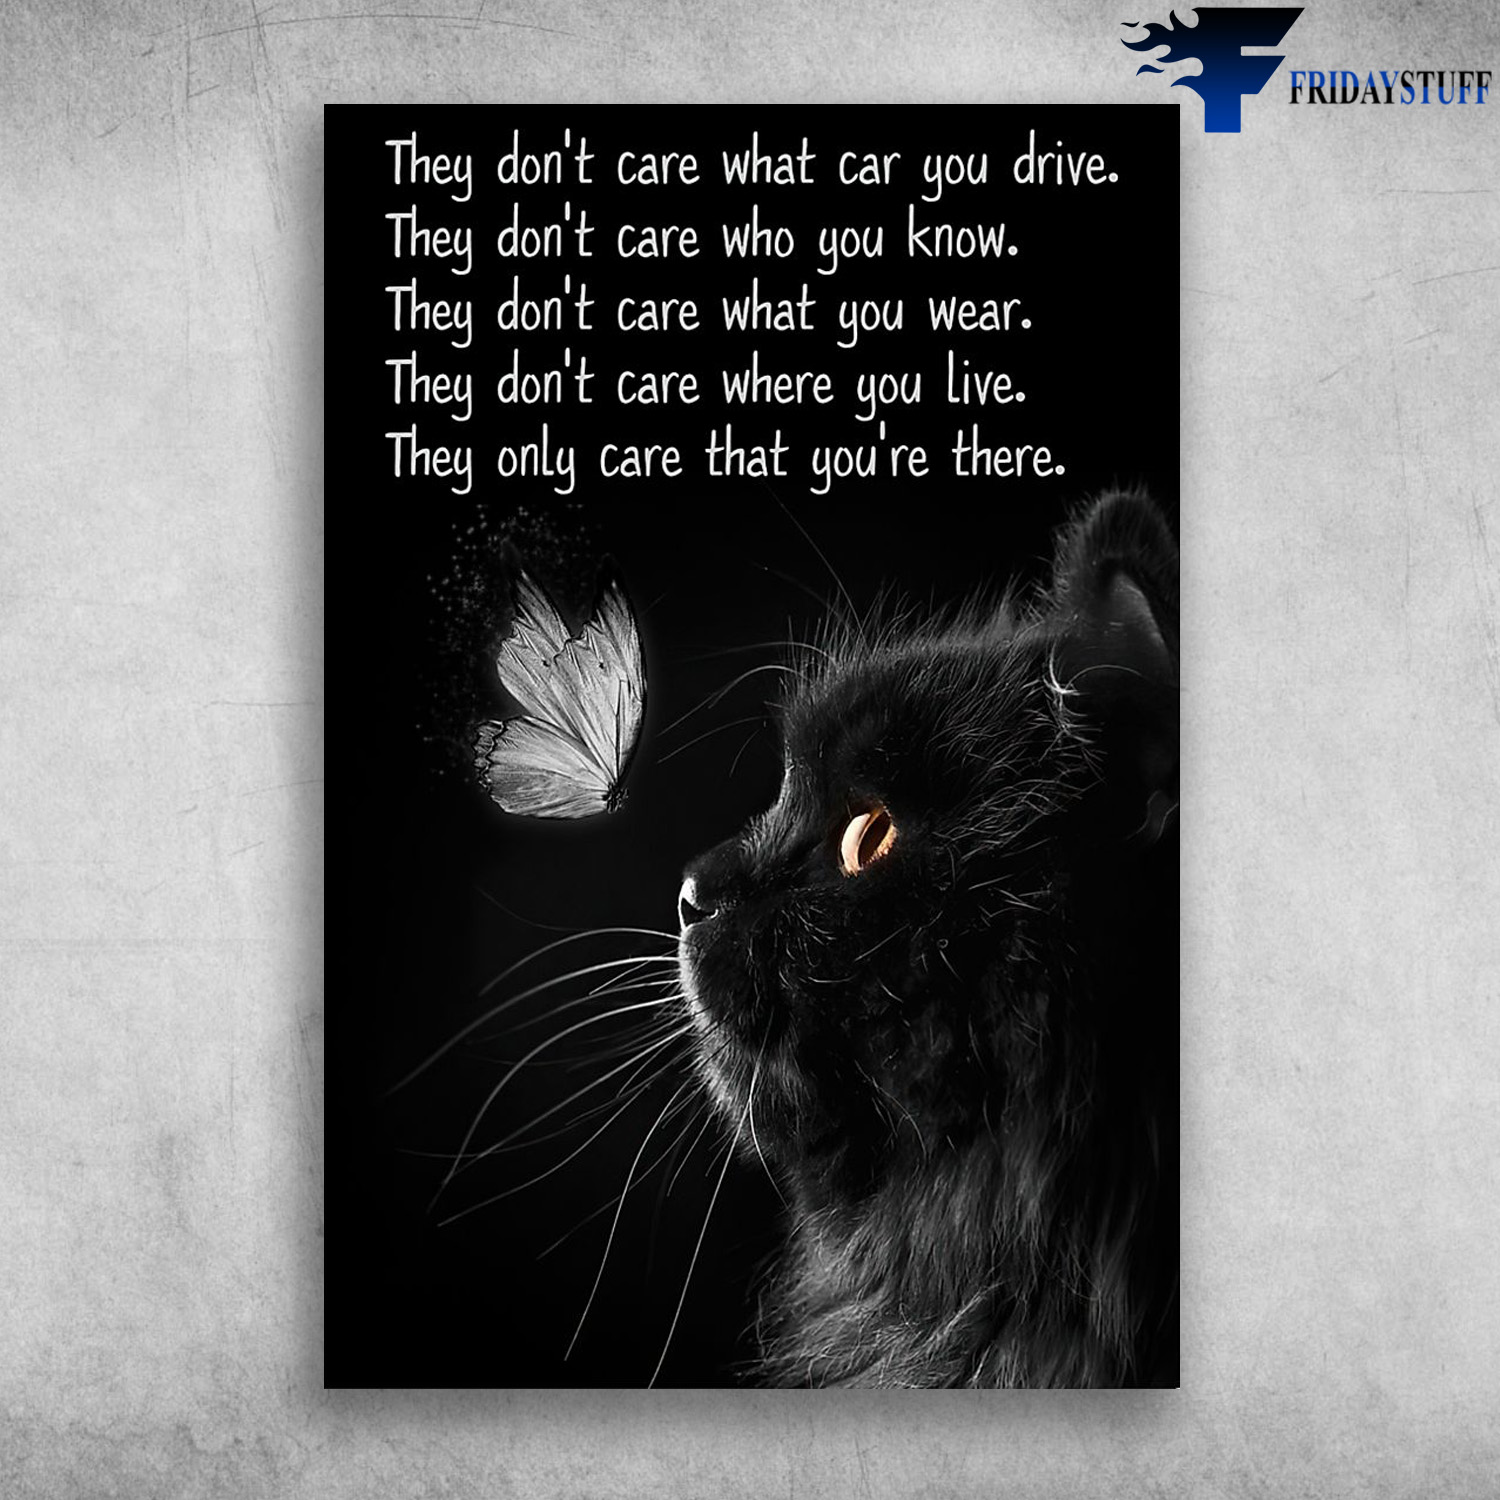 Black Cat And Butterfly - They Don't Care What Car You Drive, They Don't Care Who You Know, They Don't Care What You Wear, They Don't Care Where You Live, They Only Care That You're There